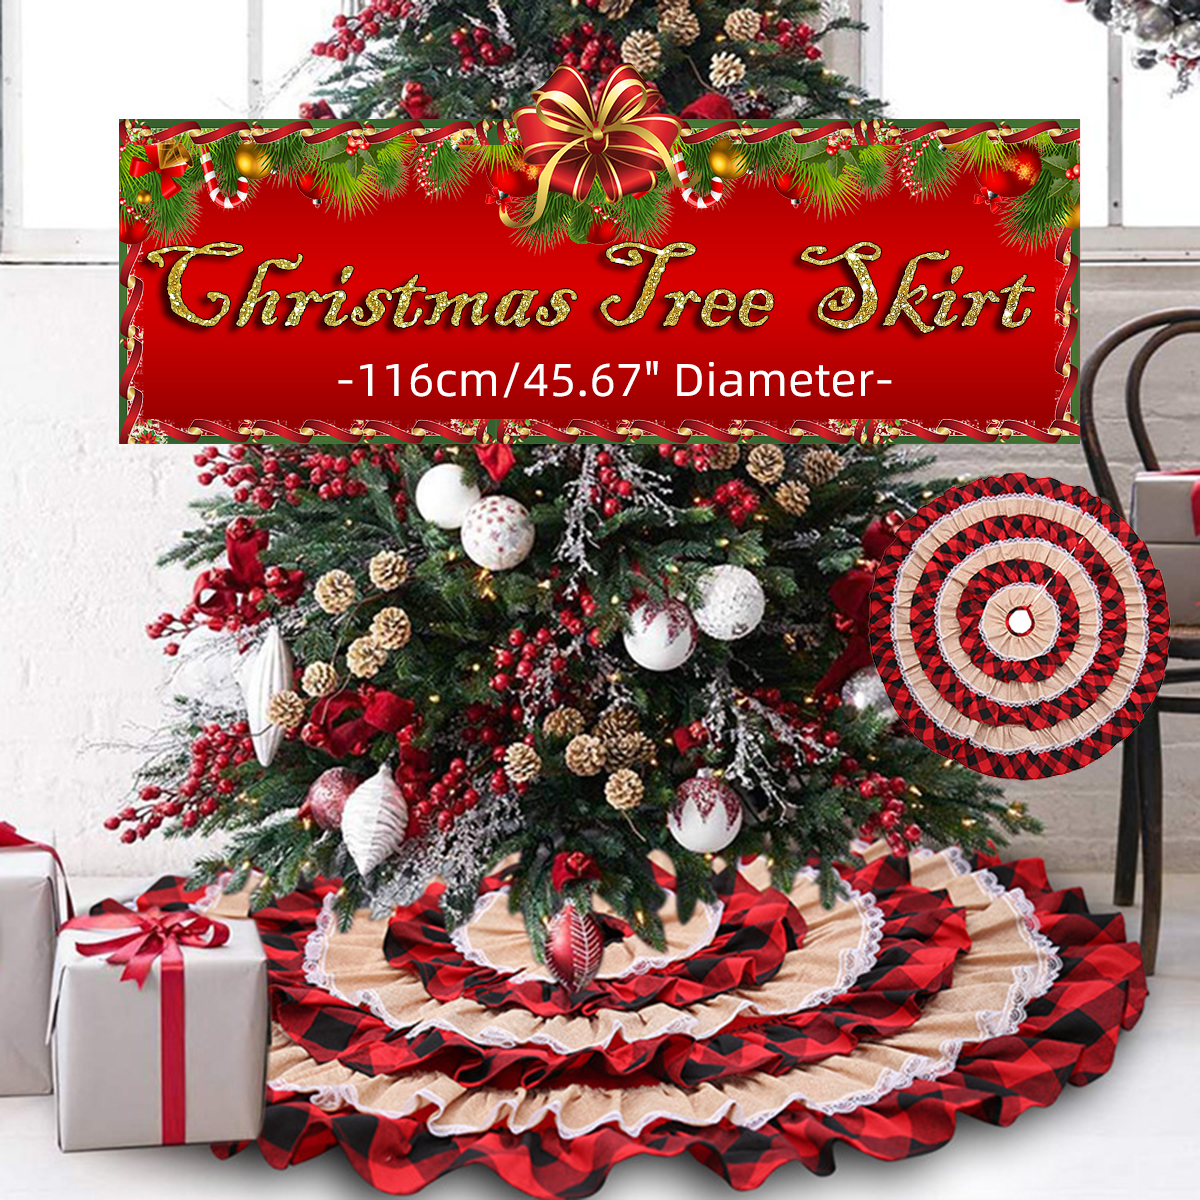 2020-Christmas-Tree-Skirts-Red-Cake-Plaid-Lace-Carpet-Round-Linen-Apron-New-Year-Blanket-Home-Partie-1770964-1